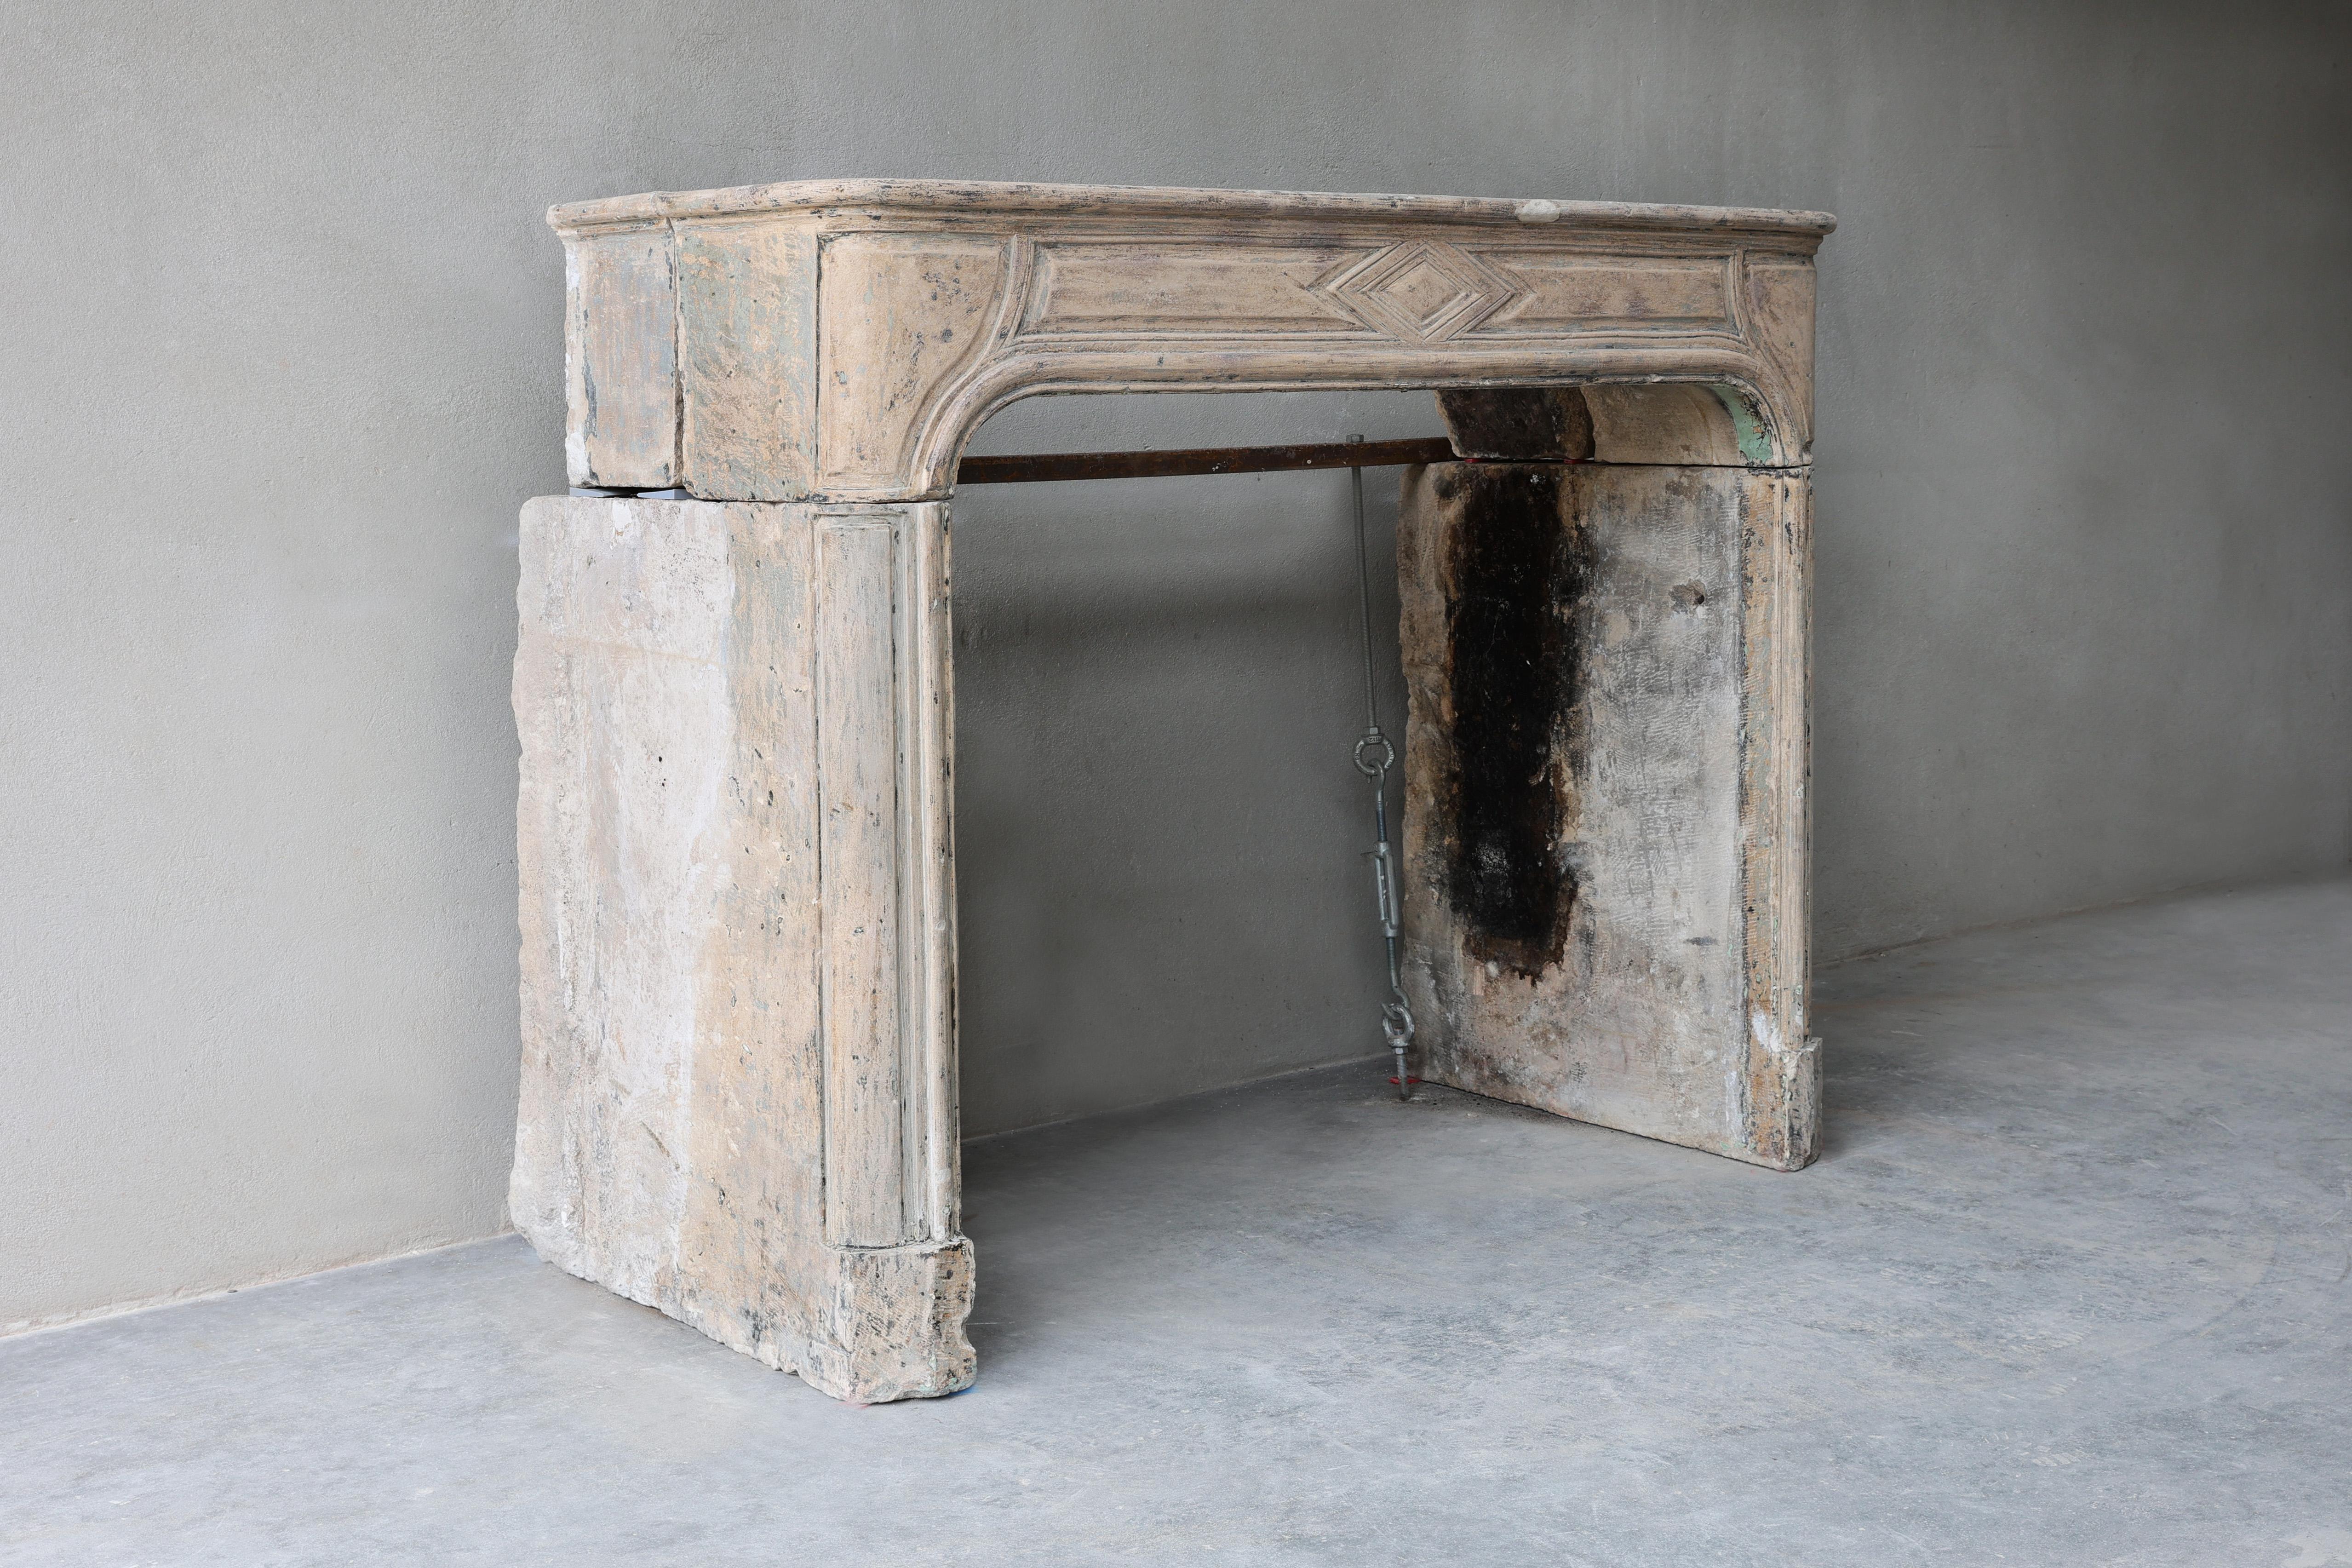 Beautiful compact antique fireplace made of French limestone. A 19th century fireplace in Louis XIV style! Equipped with beautiful lines and patina.